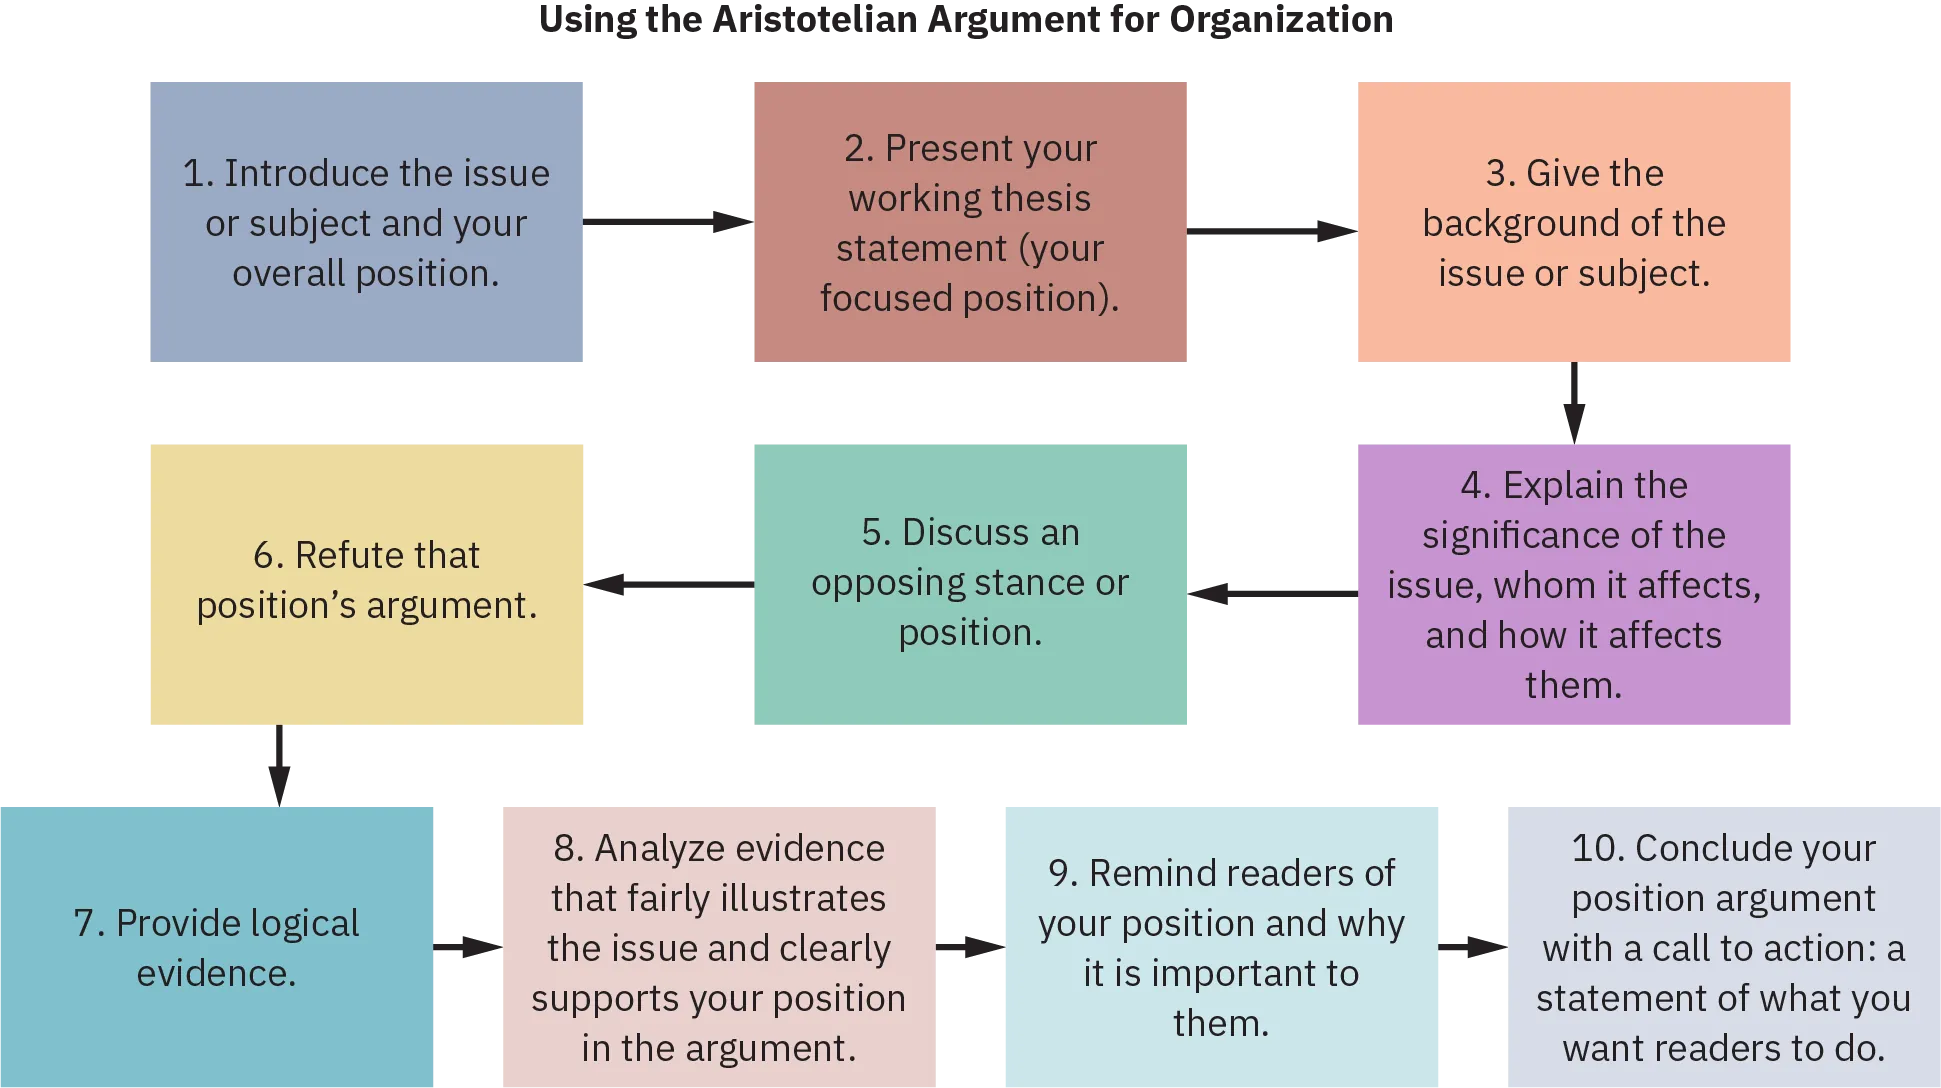 A flow chart titled “Using the Aristotelian Argument for Organization” connects rectangles of the same size via arrows. The ten rectangular boxes read, “ Introduce the issue or subject and your overall position.”; “Present your working thesis statement (your focused position).”; “Give the background of the issue or subject.”; “Explain the significance of the issue, whom it affects, and how it affects them.”; “Discuss an opposing stance or position.”; “Refute that position’s argument.”; “Provide logical evidence.”; “Analyze evidence that fairly illustrates the issue and clearly supports your position in the argument.”; “Remind readers of your position and why it is important to them.” ; and “Conclude your position argument with a call to action: a statement of what you want readers to do.”